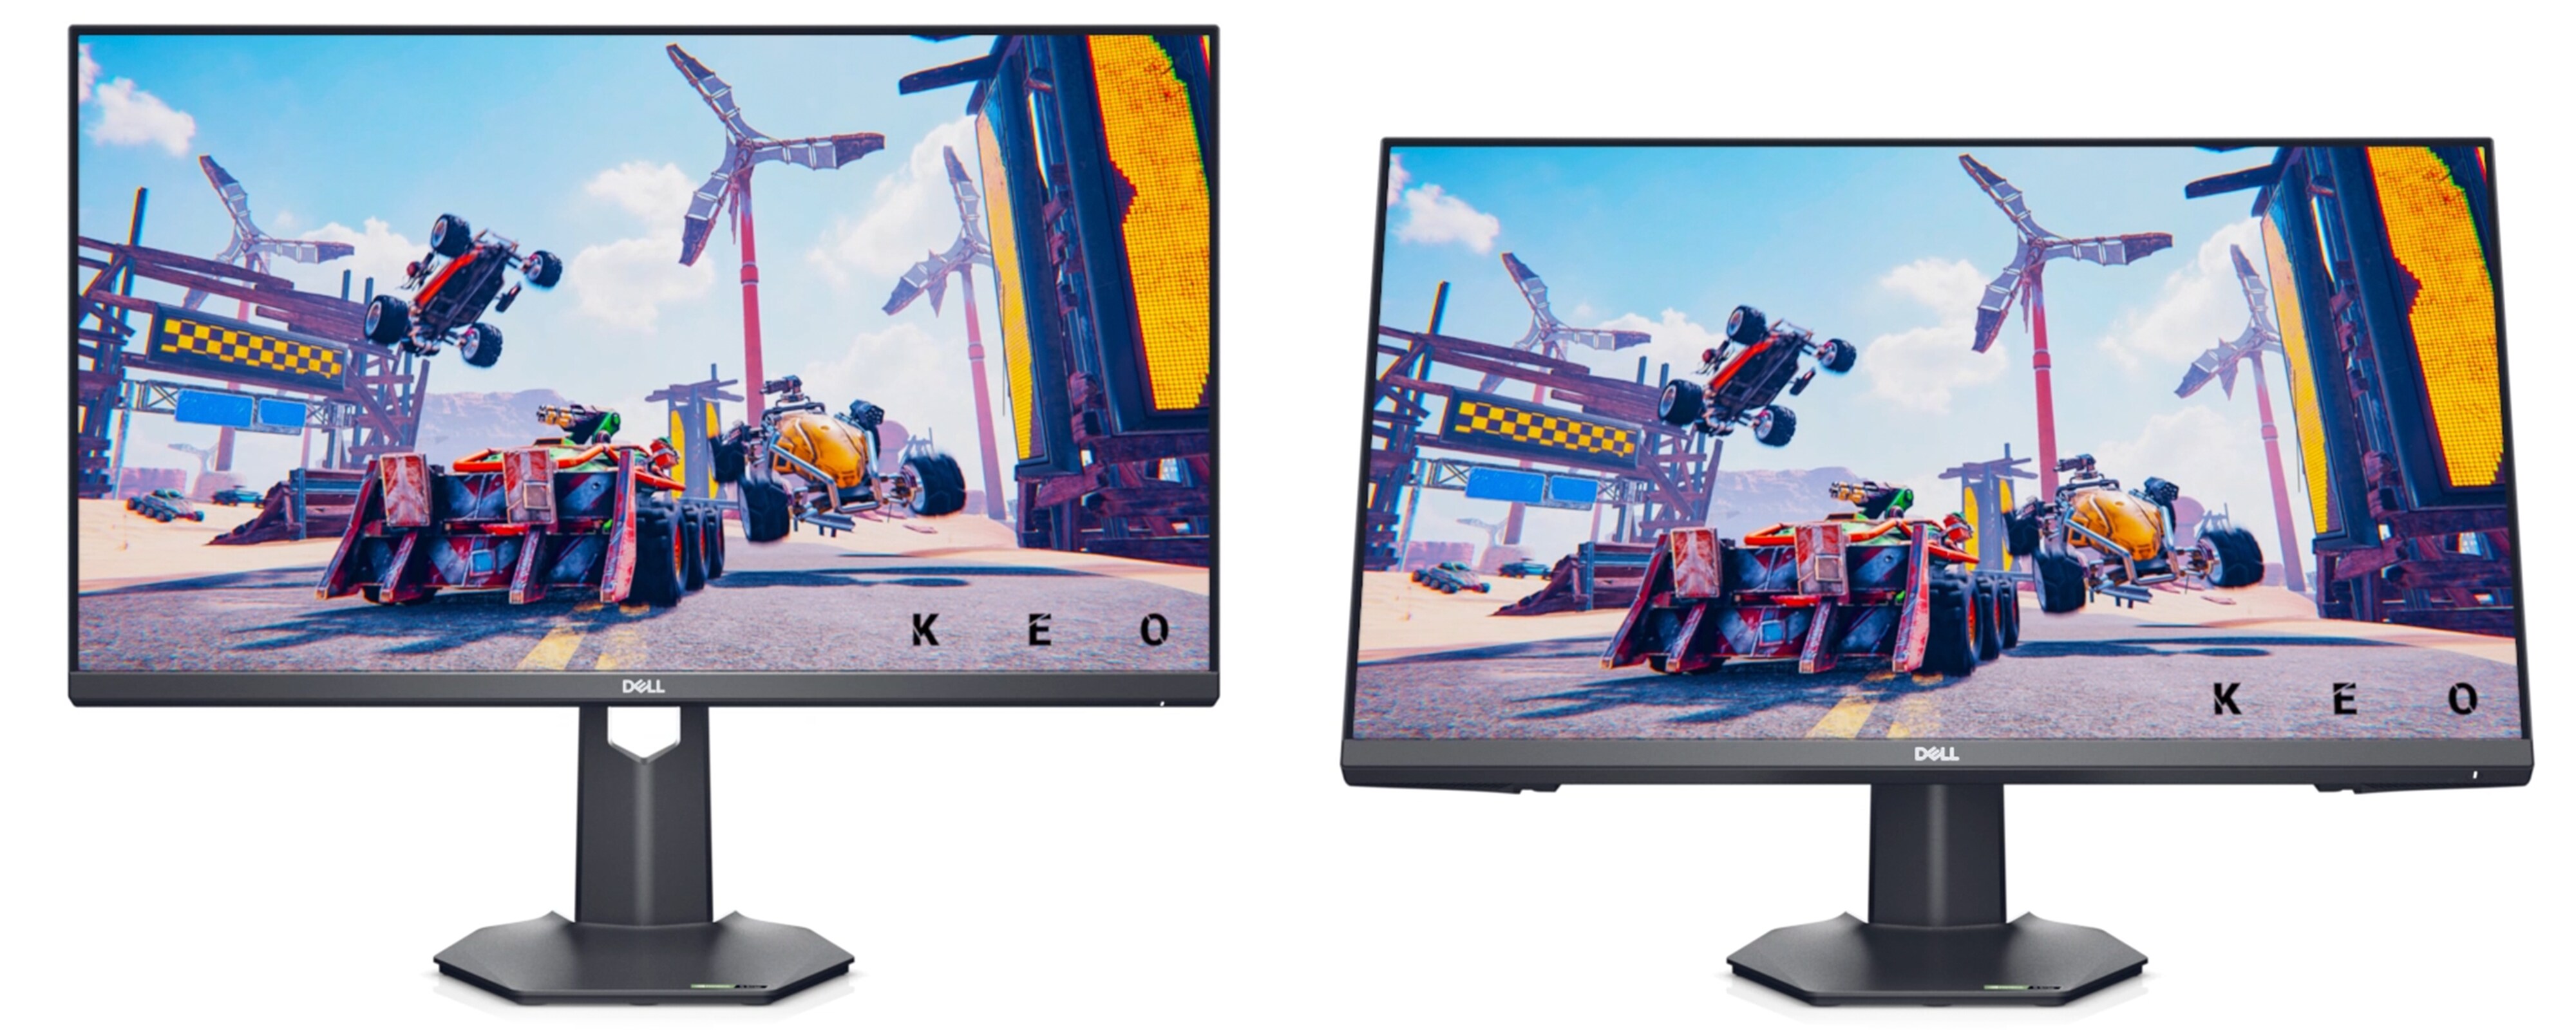 Picture of two Dell G2722HS Gaming Monitors on a white background with a KEO game image on both screens.